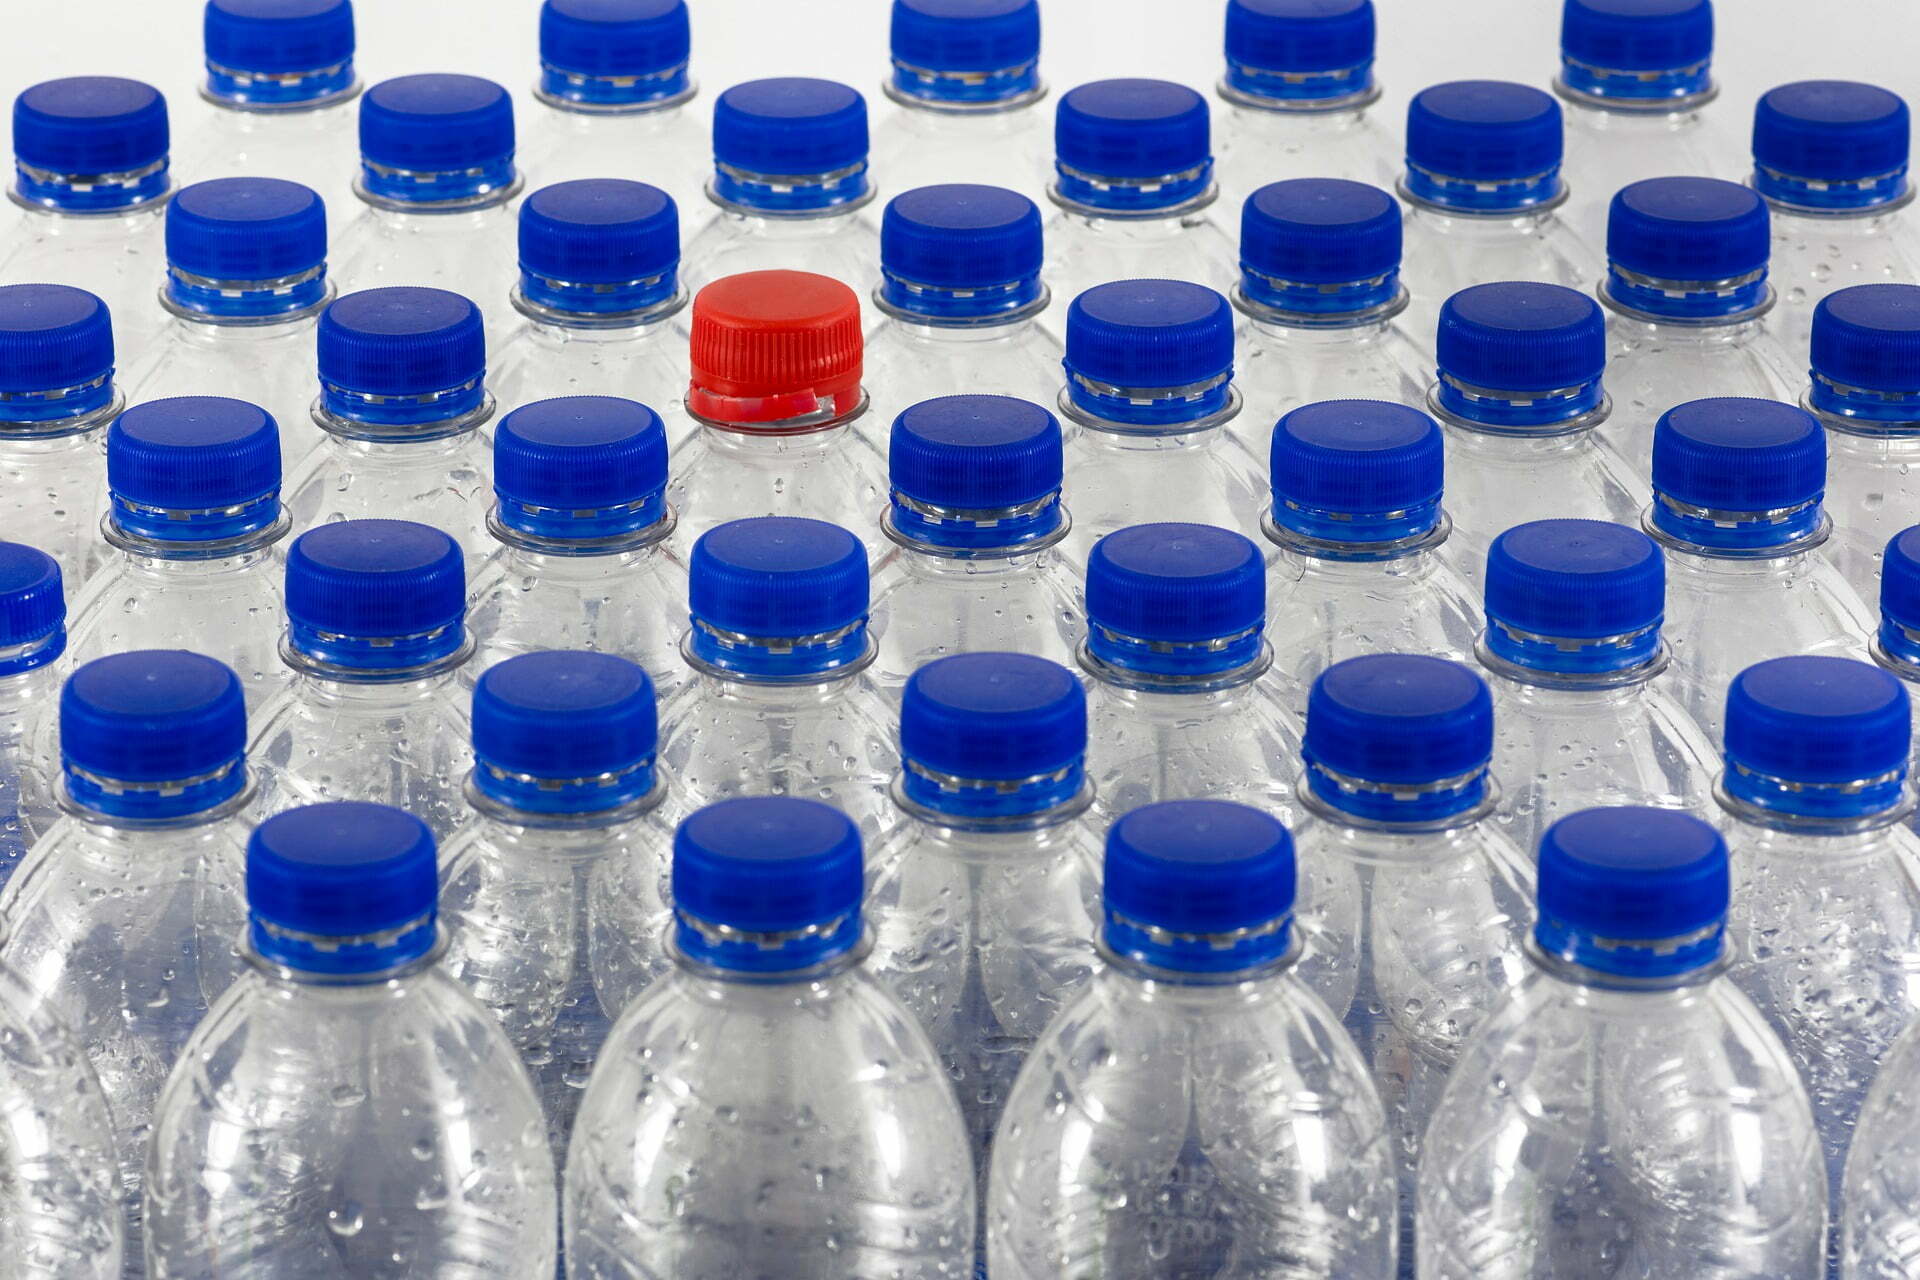 bottles g4fdc8161c 1920 Nestlé Has Cut Greenhouse Gases by 4 Million Tons Since 2018. How?